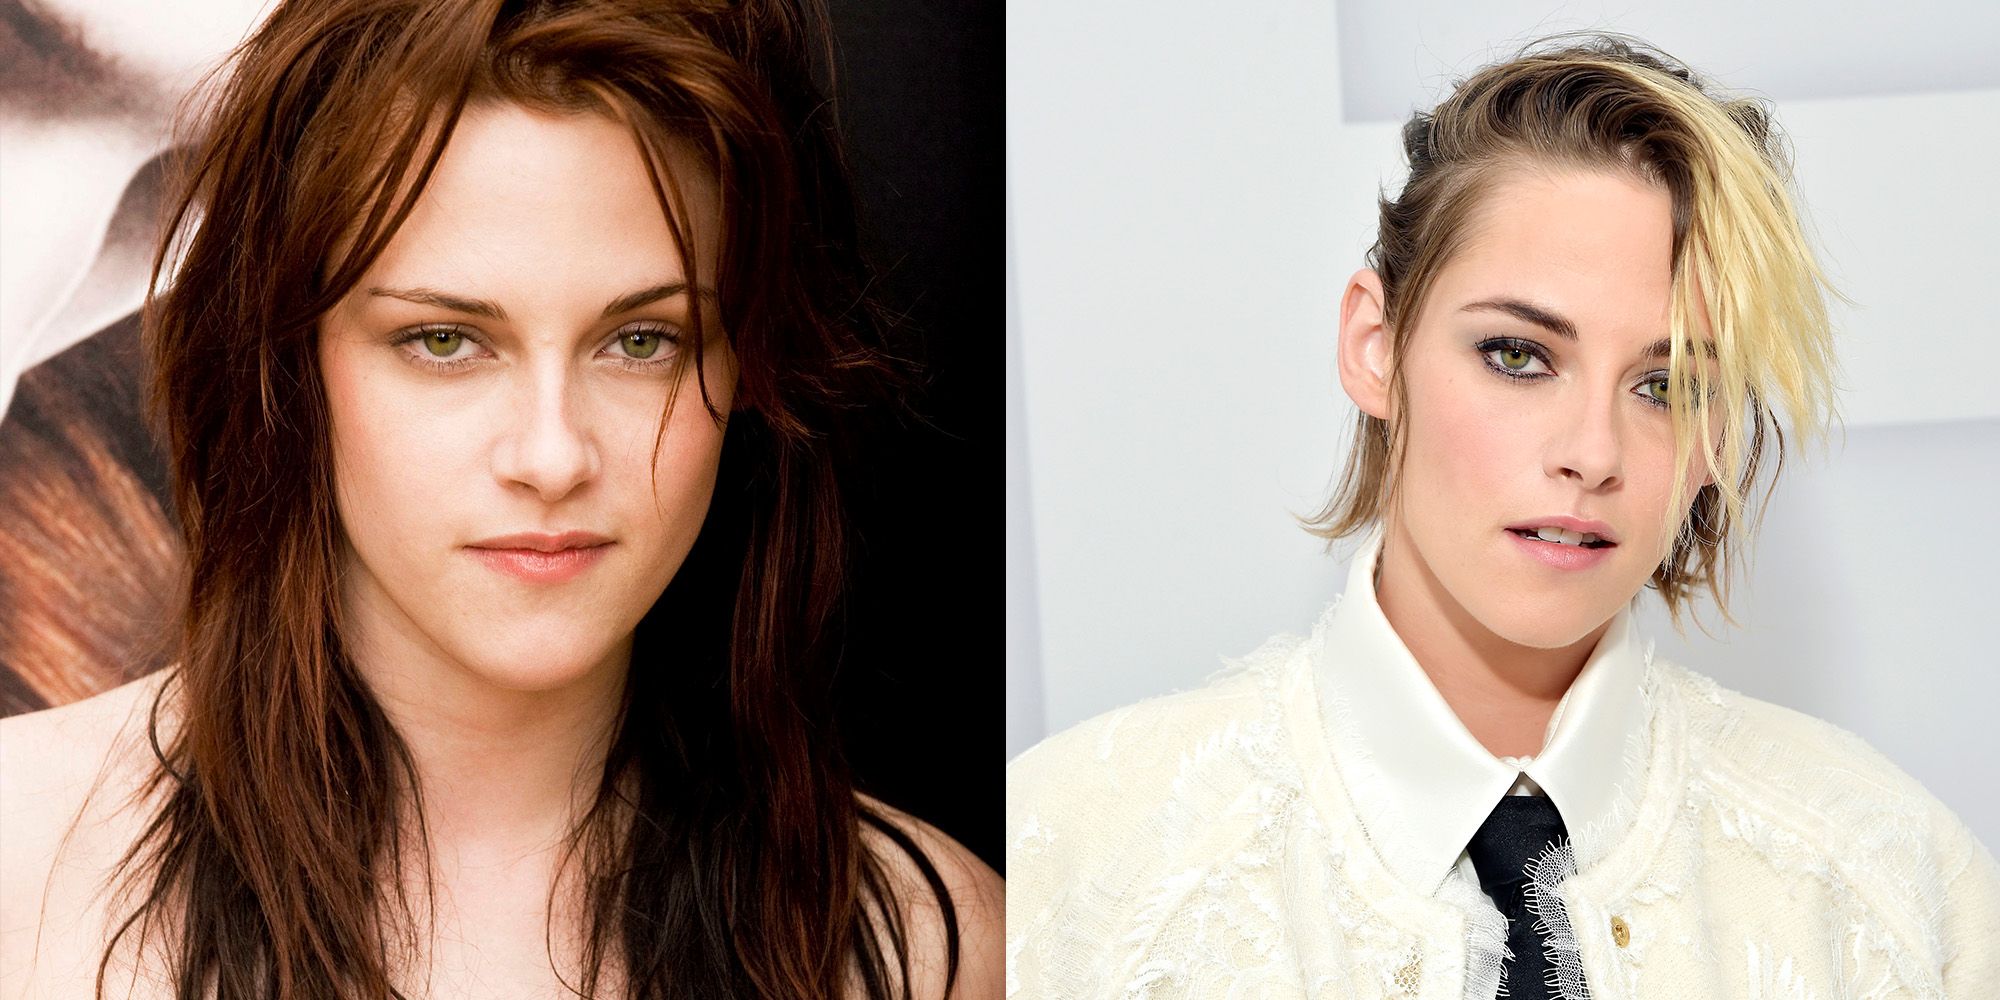 The Cast of Twilight Then and Now - 1st Twilight Movie Cast Today